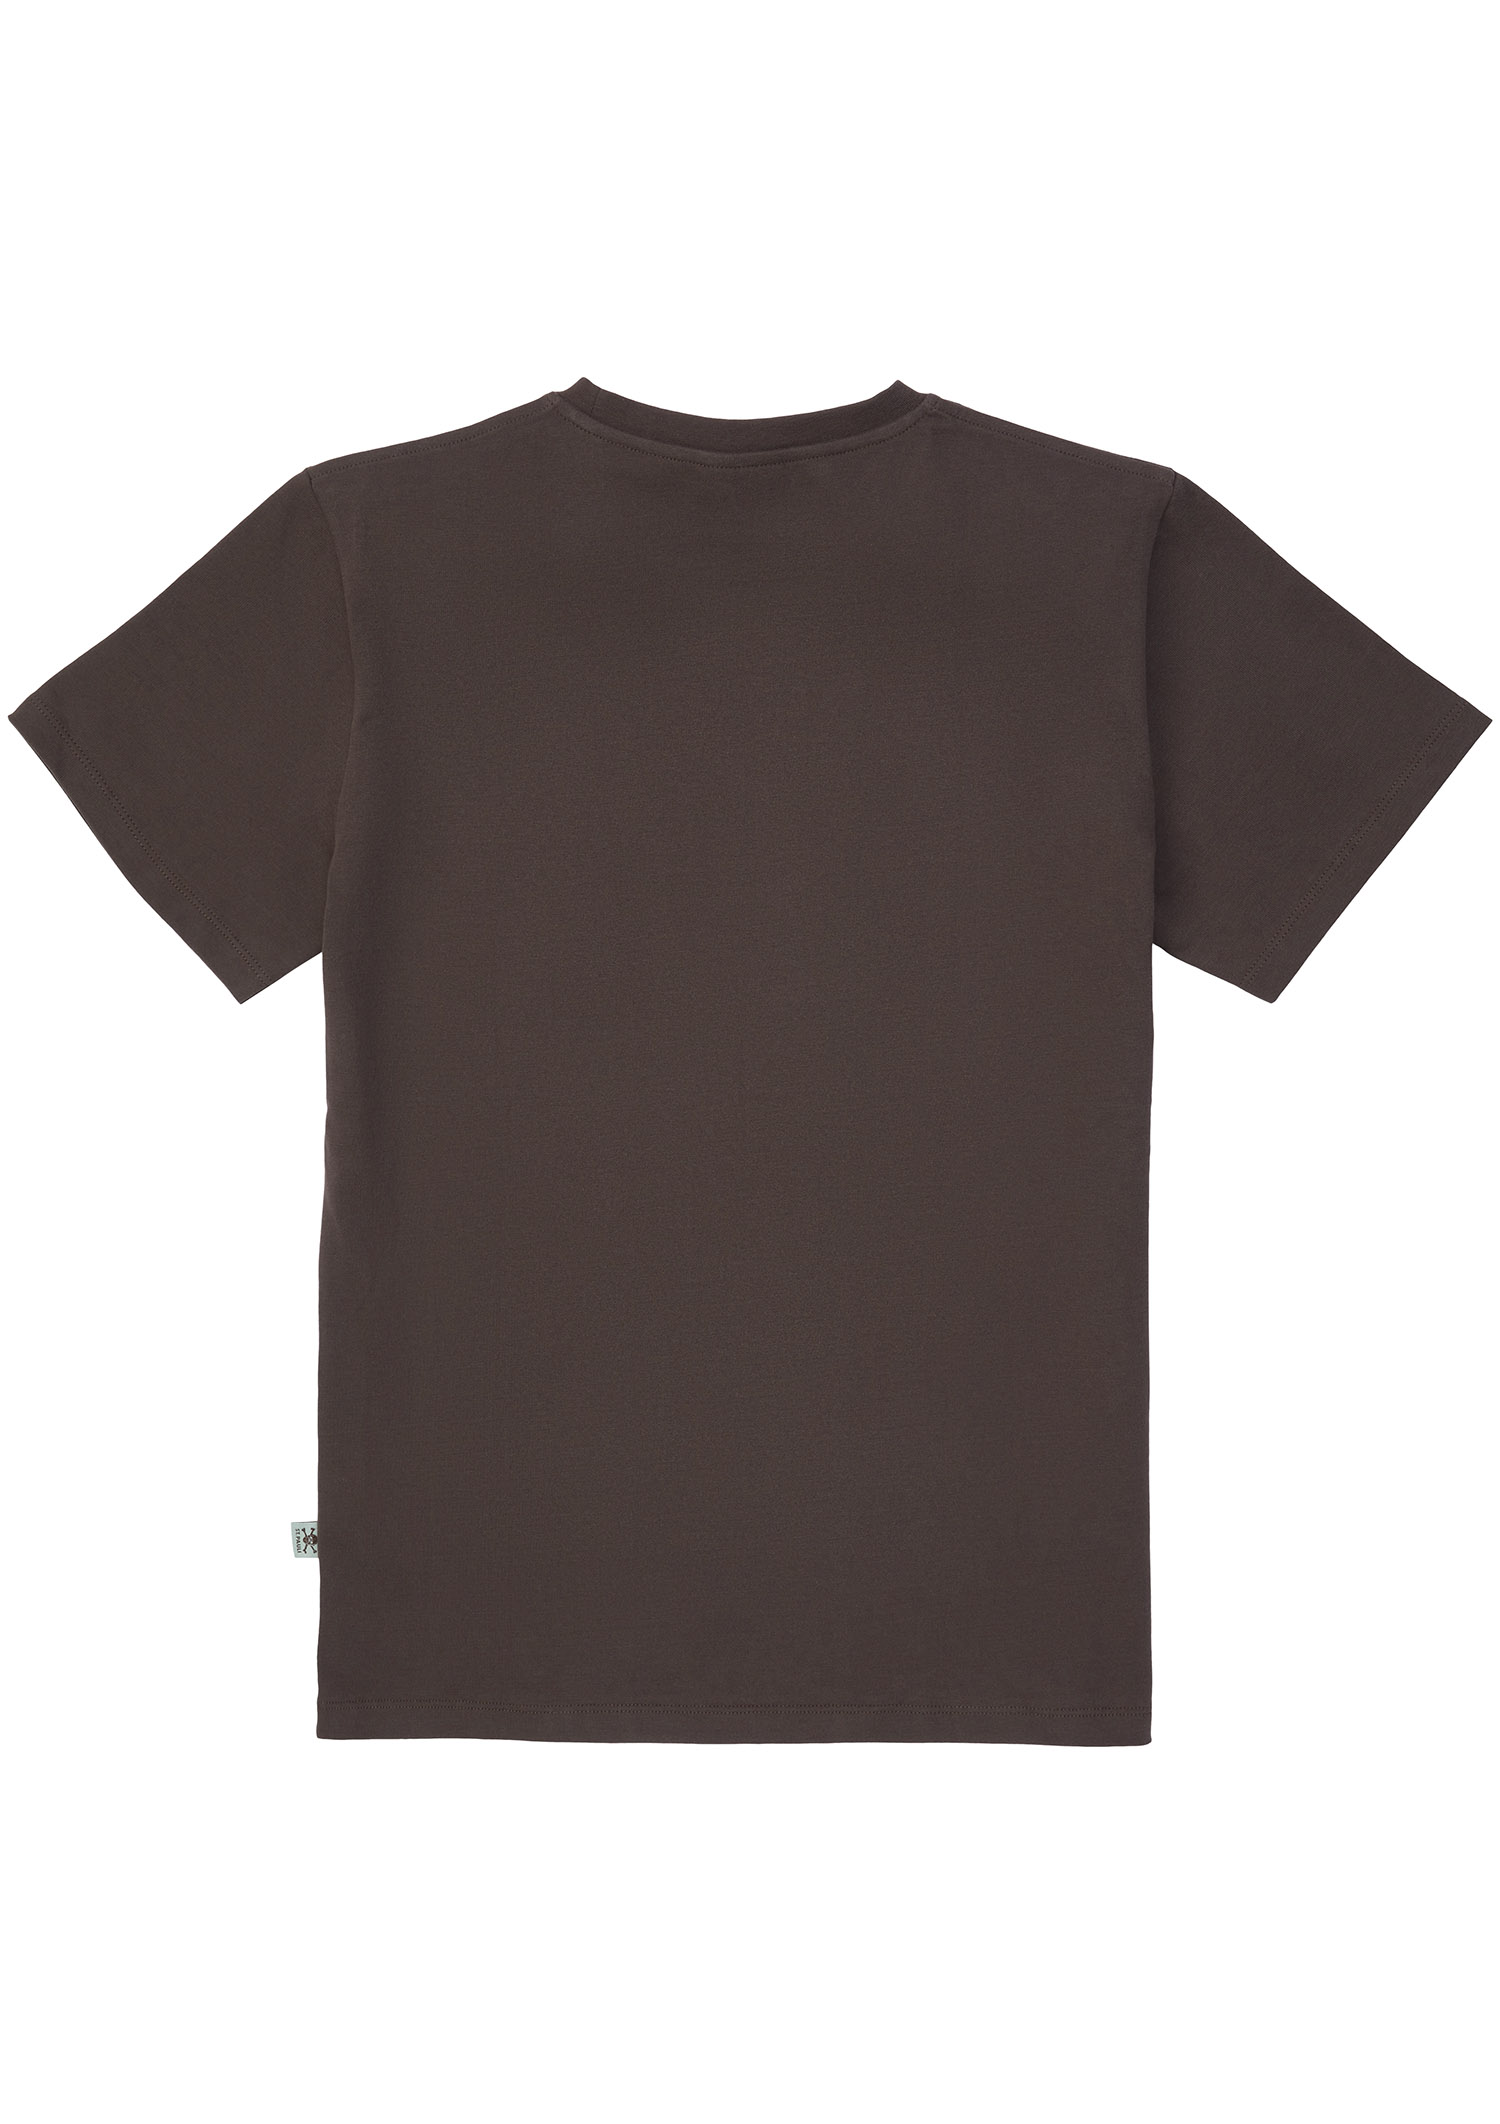 T-Shirt "All Colours" - Chocolate Brown